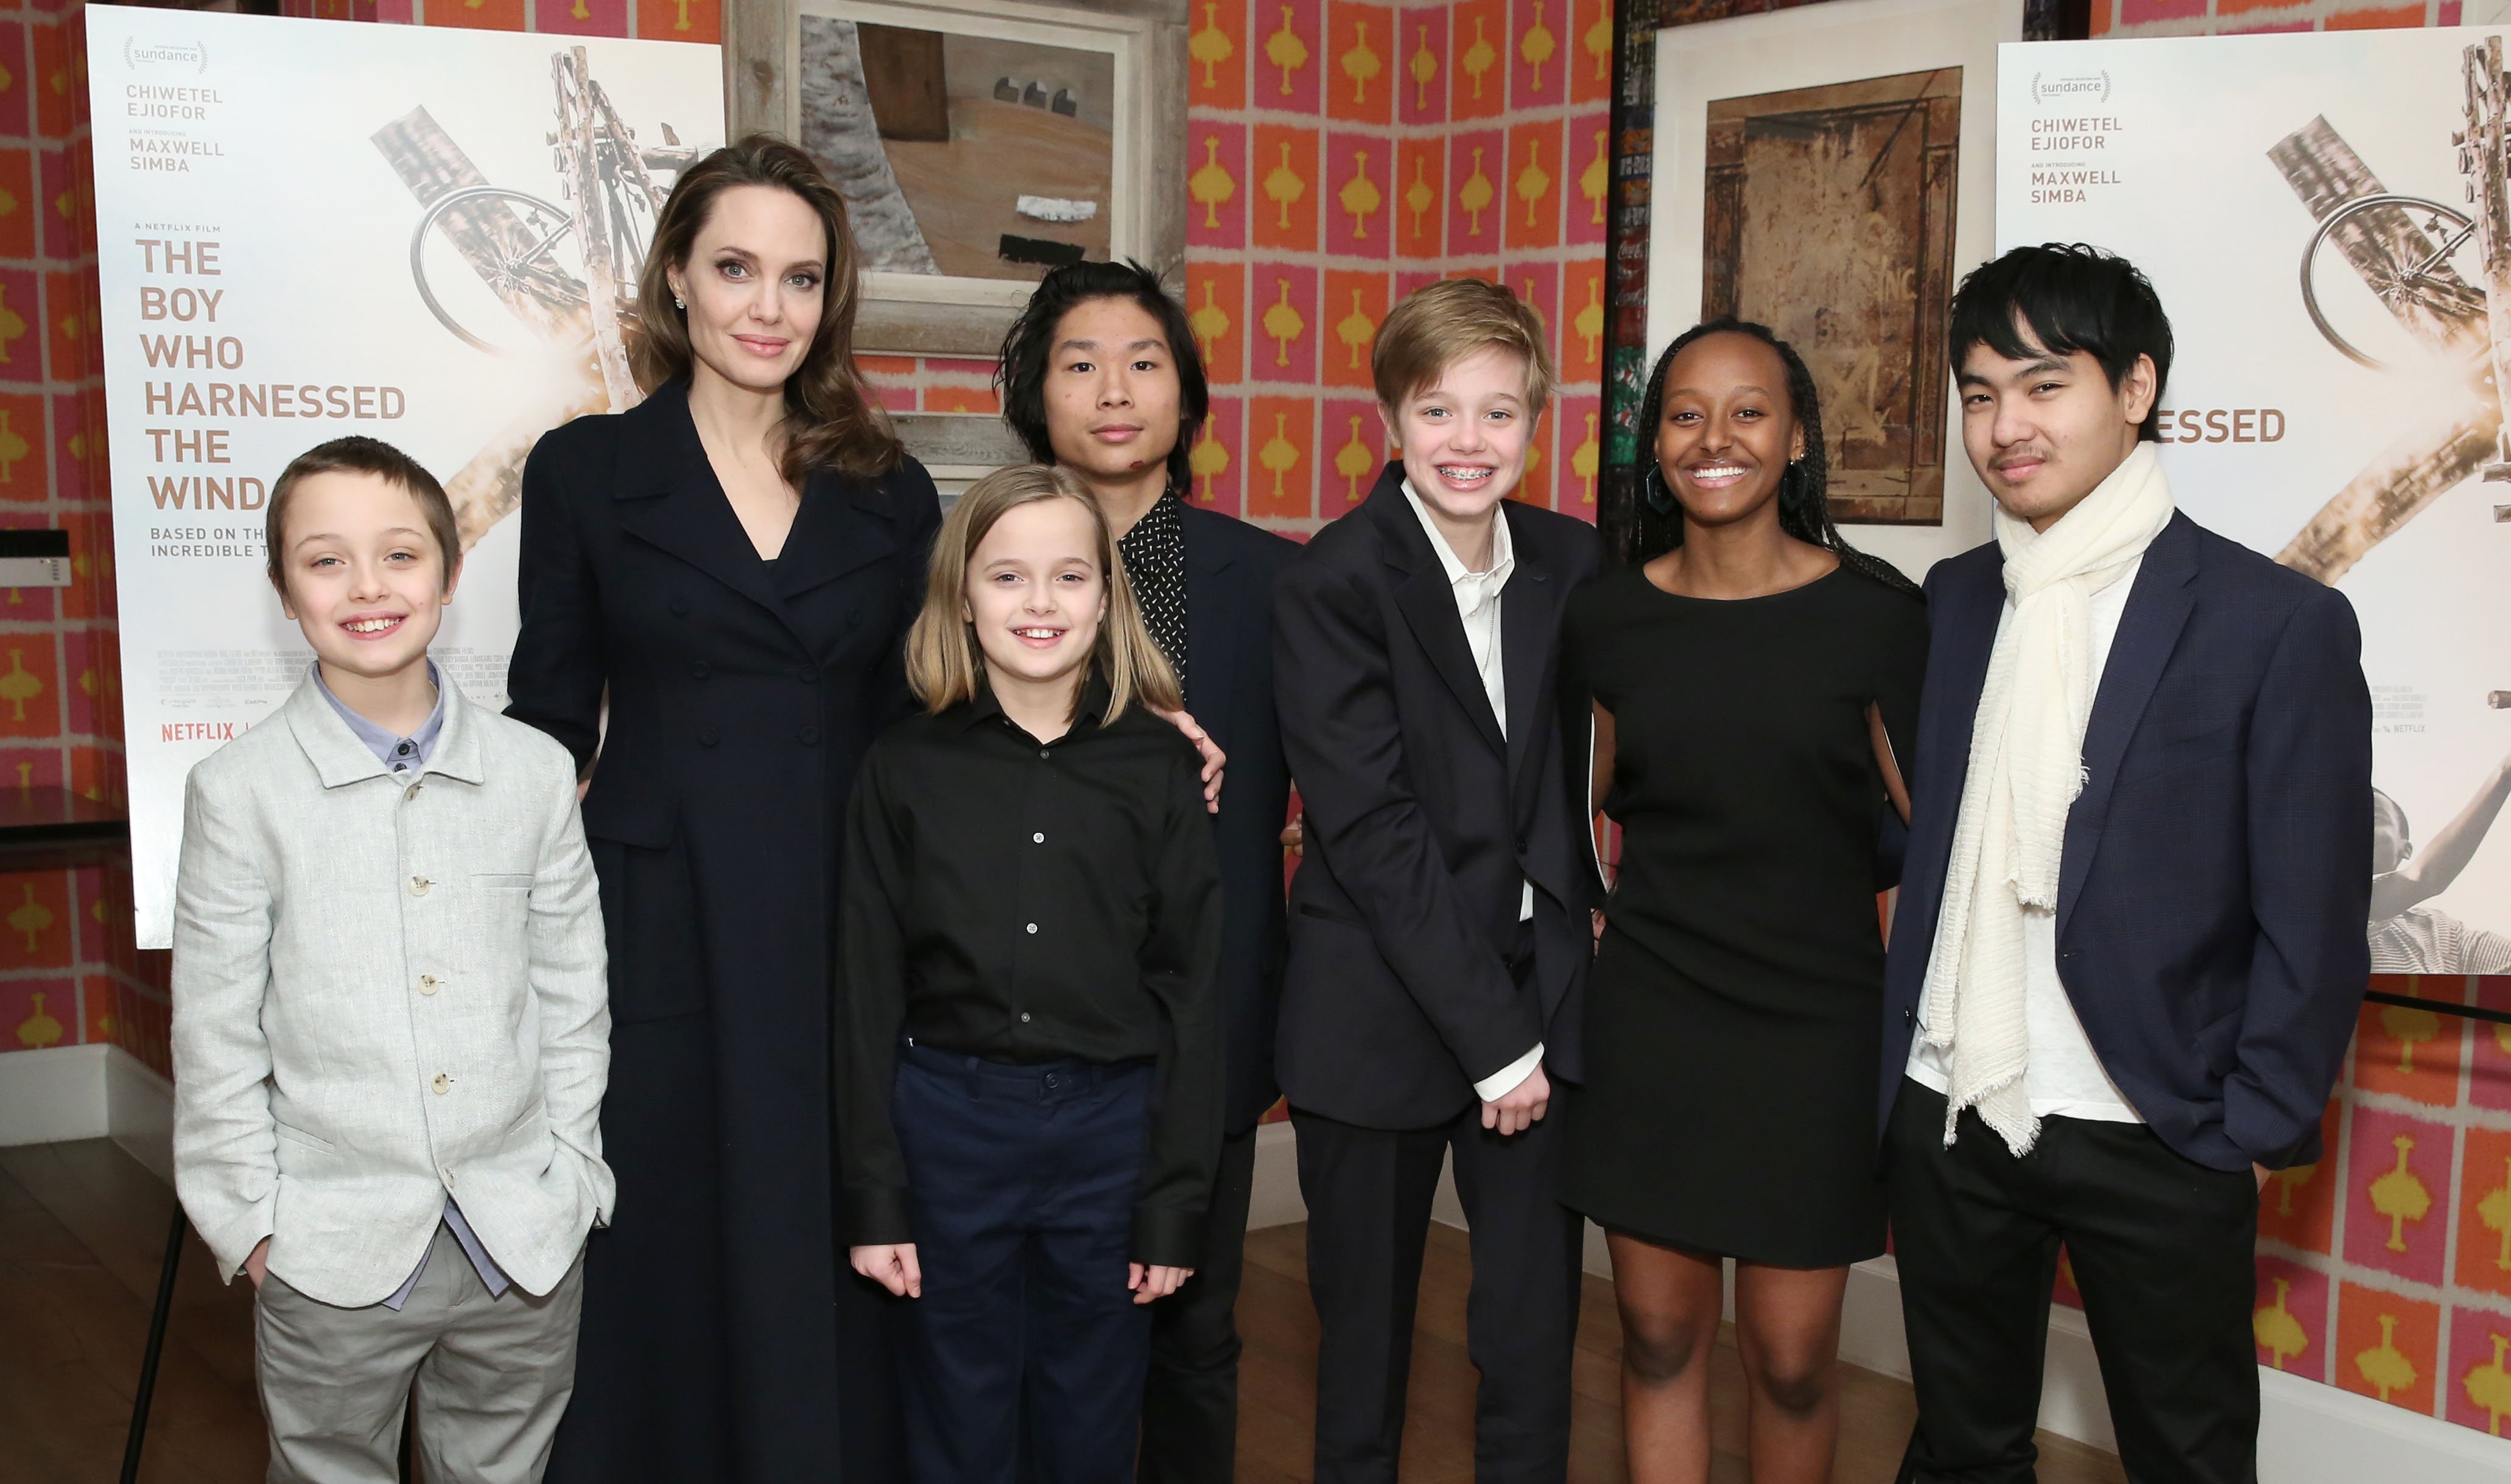 Angelina Jolie with children Knox, Vivienne, Pax, Shiloh, Zahara and Maddox attend "The Boy Who Harnessed The Wind" Screening on February 25, 2019, in New York City. | Source: Getty Images.